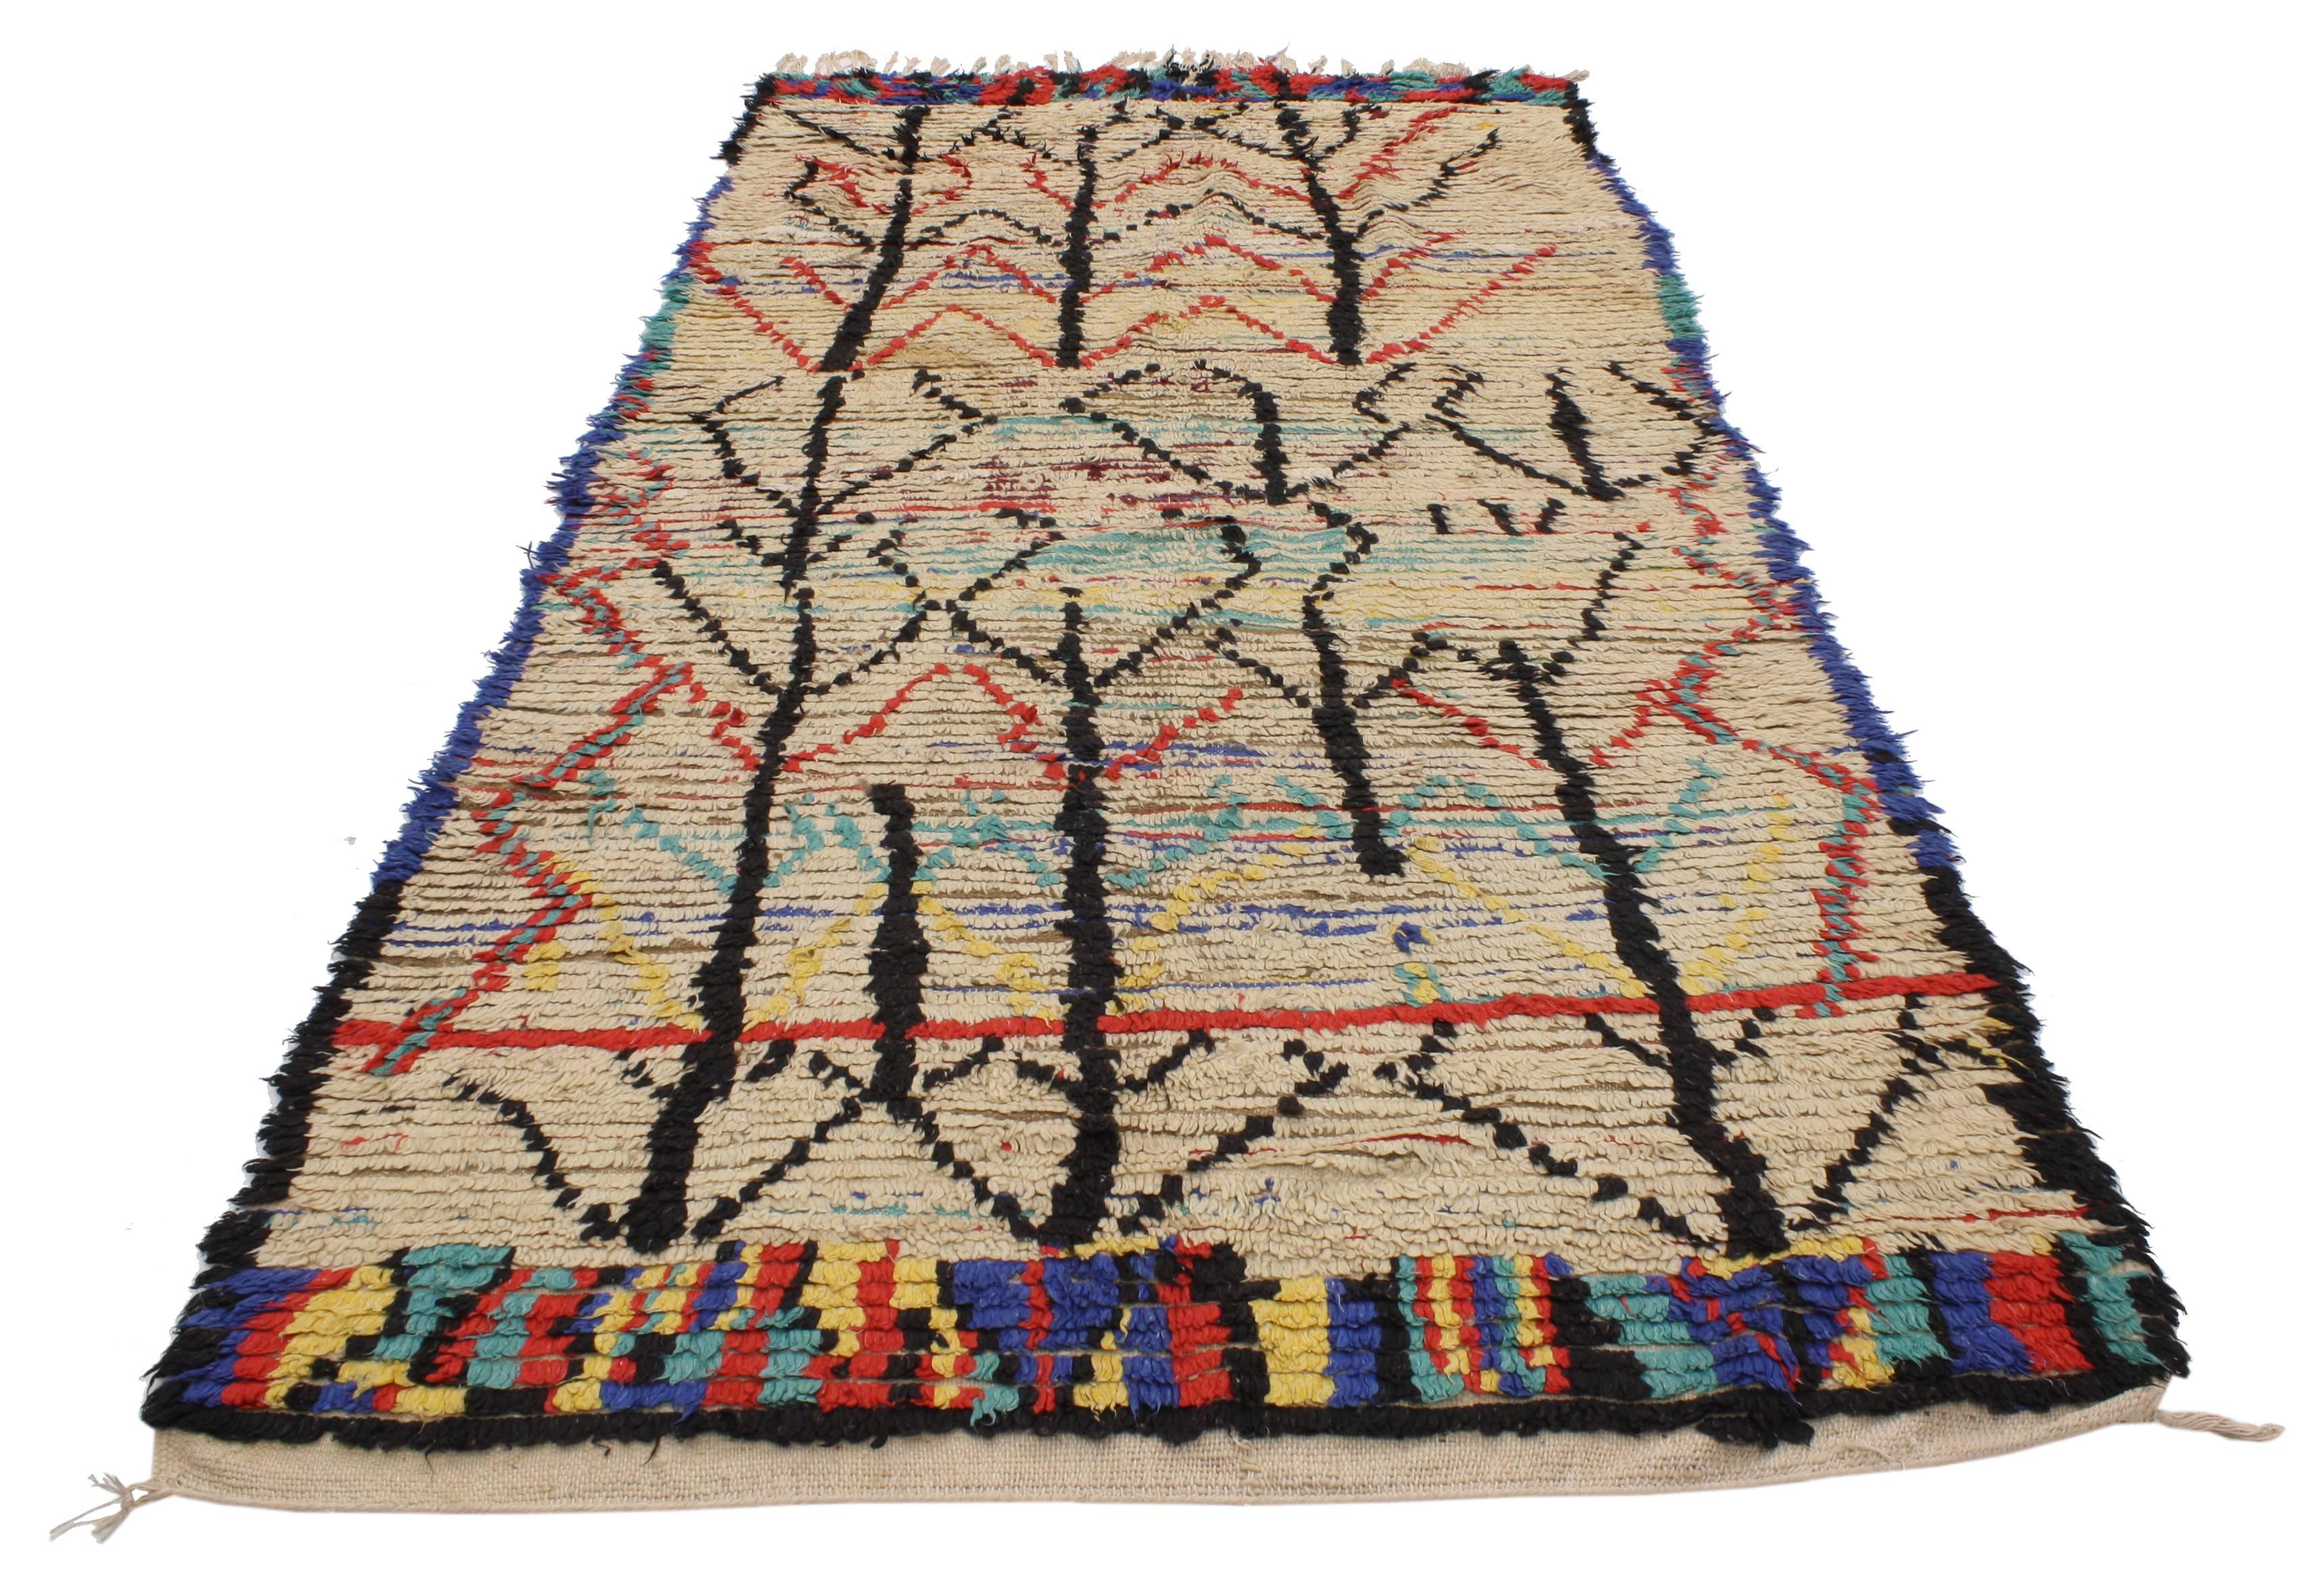 20383 Vintage Berber Moroccan Azilal Rug with Tribal Style. With its stylish levels of complexity combined with Folk-Art creativity, this Mid-Century Modern vintage Berber Moroccan rug is an impeccable representation of Primitive tribal design.